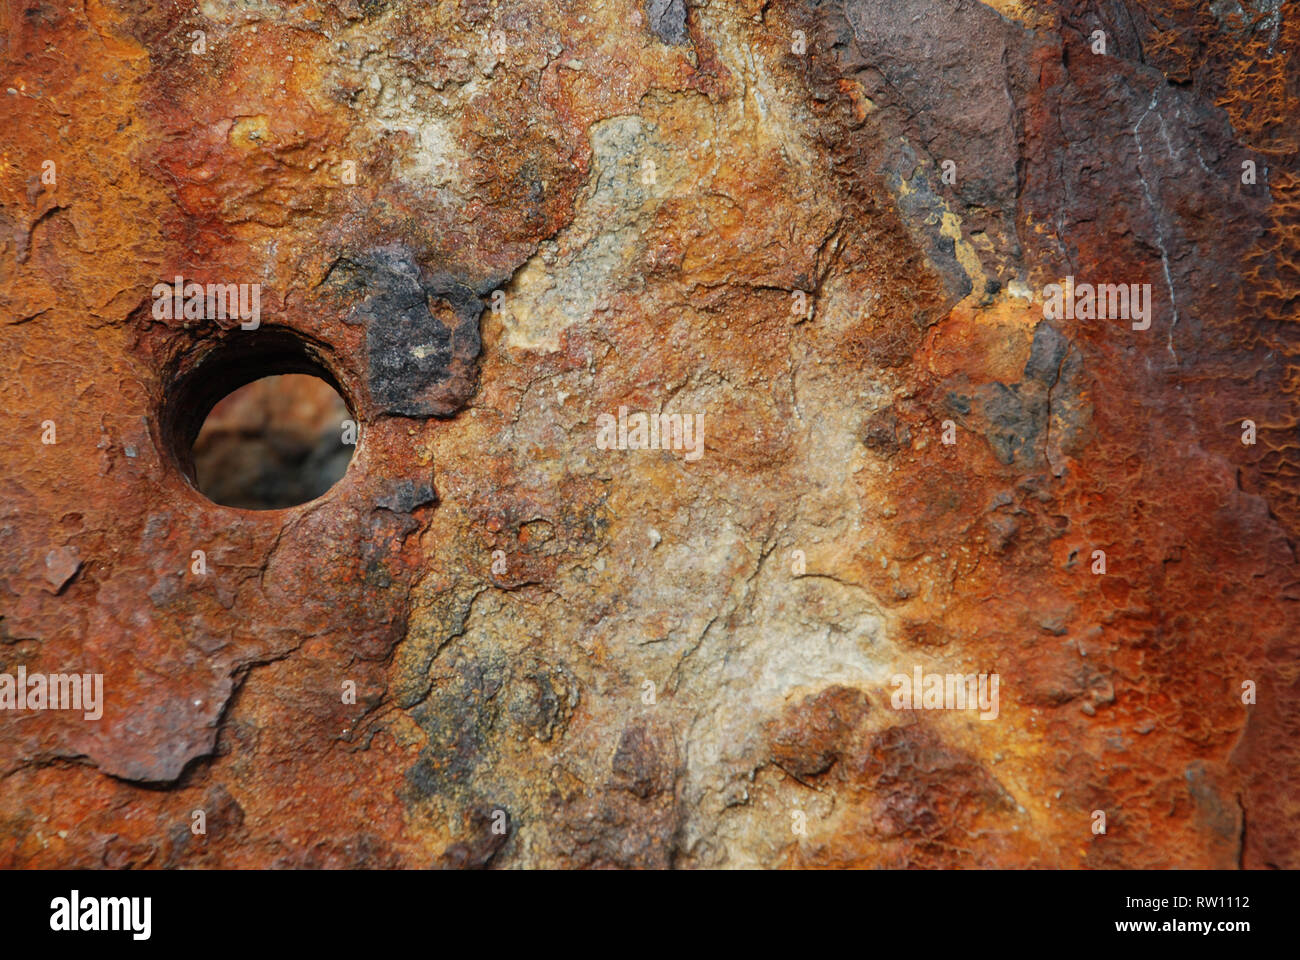 close up of a rusting coastal groin showing flaking, discolouration and damage through weathering and time Stock Photo